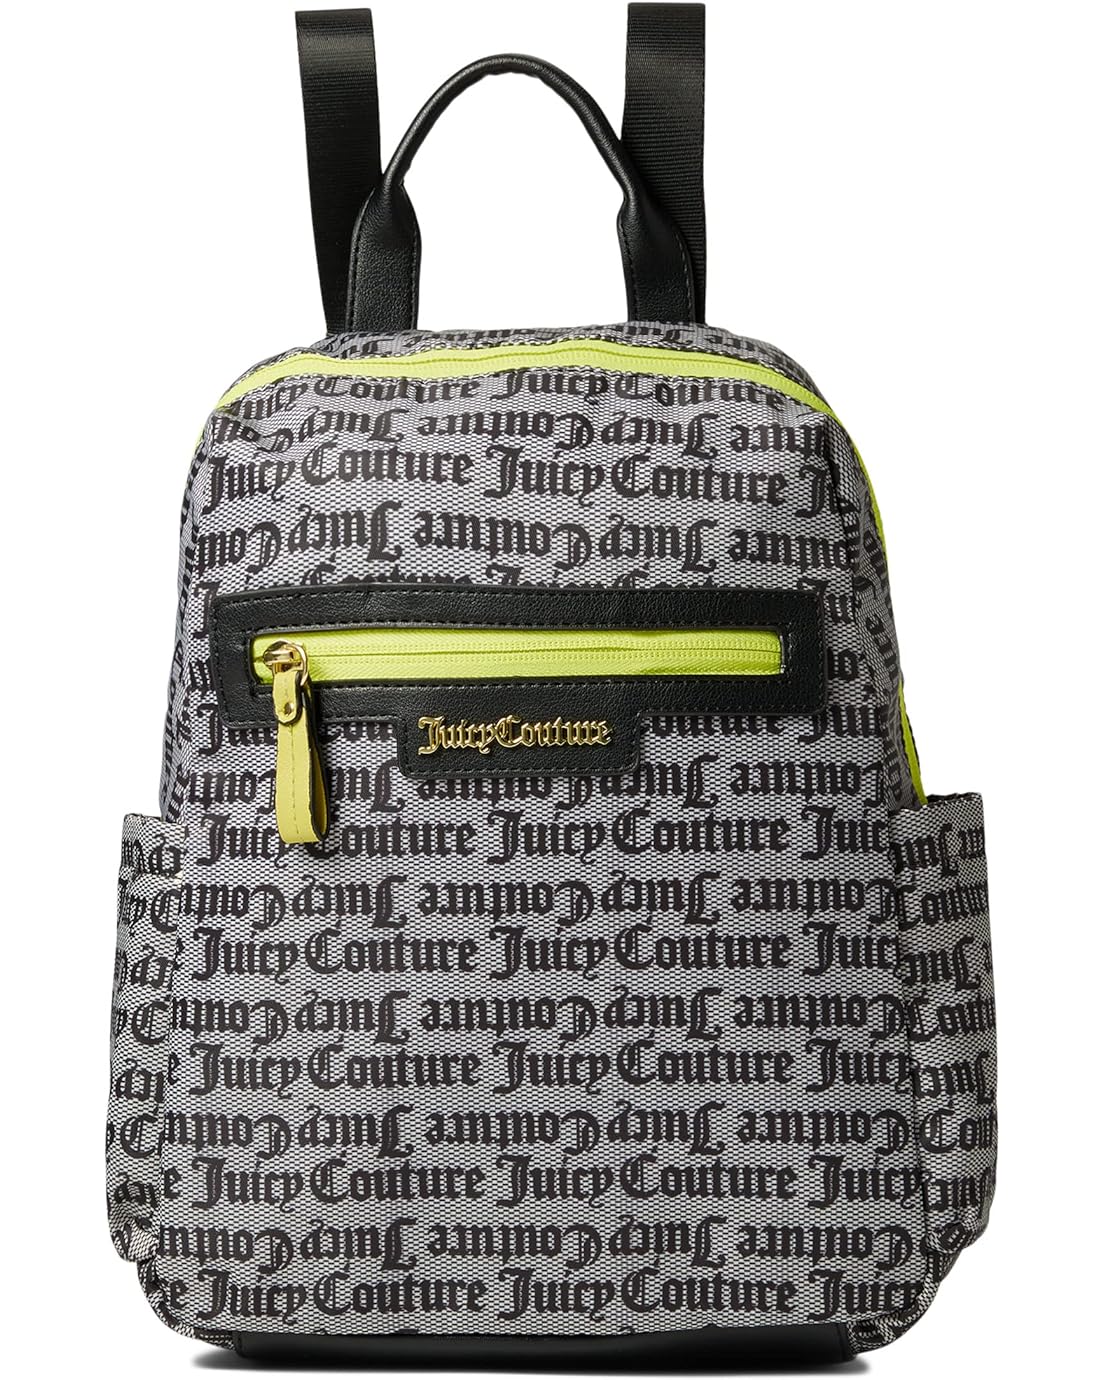 Juicy Couture Lollipop Large Backpack